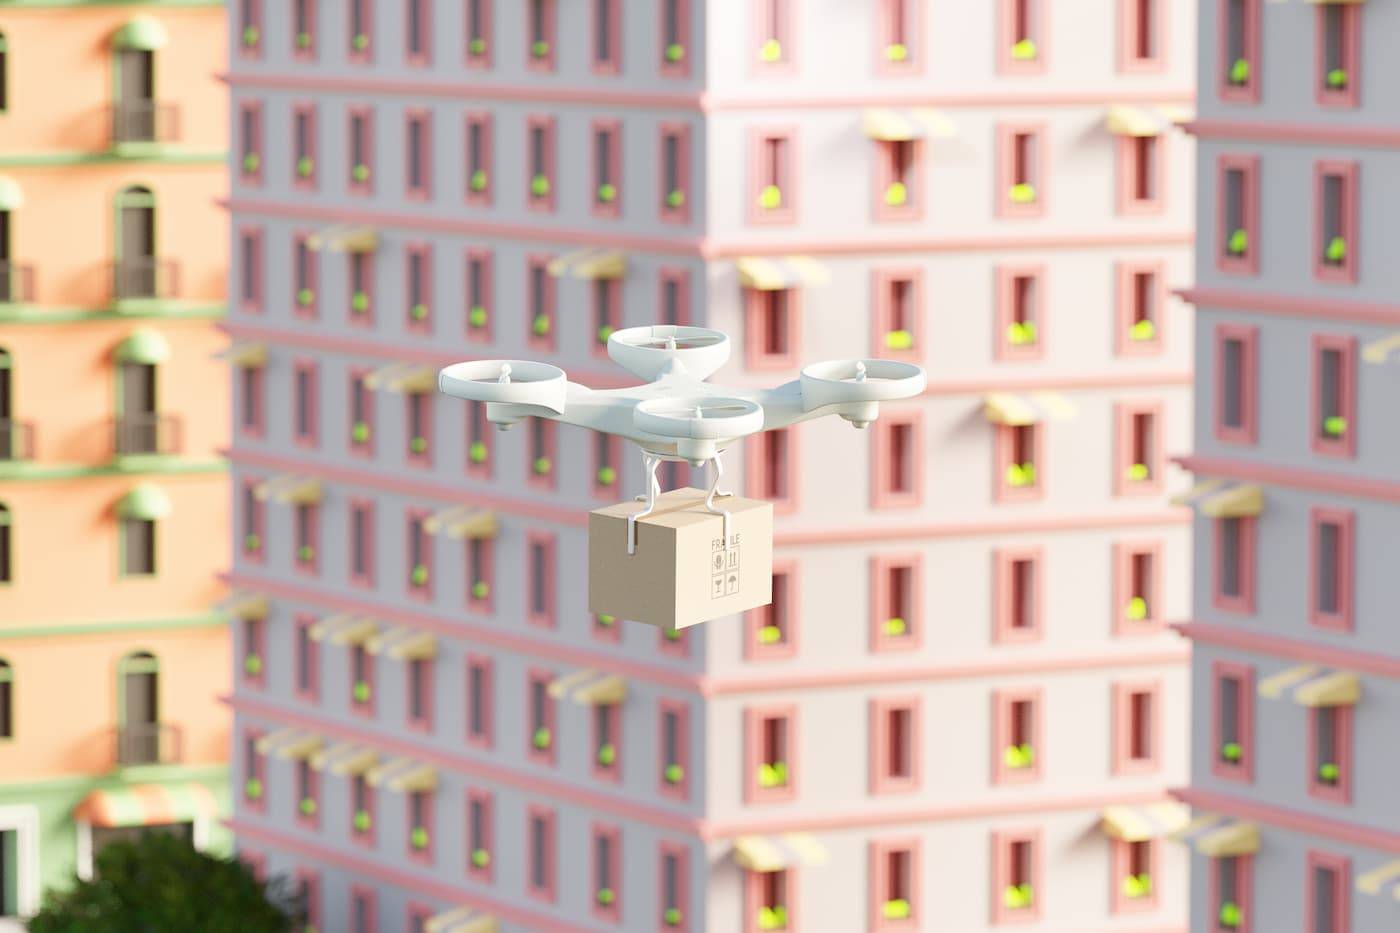 Delivery drone transporting cardboard package box parcel shipment across city. 3D logistics render.